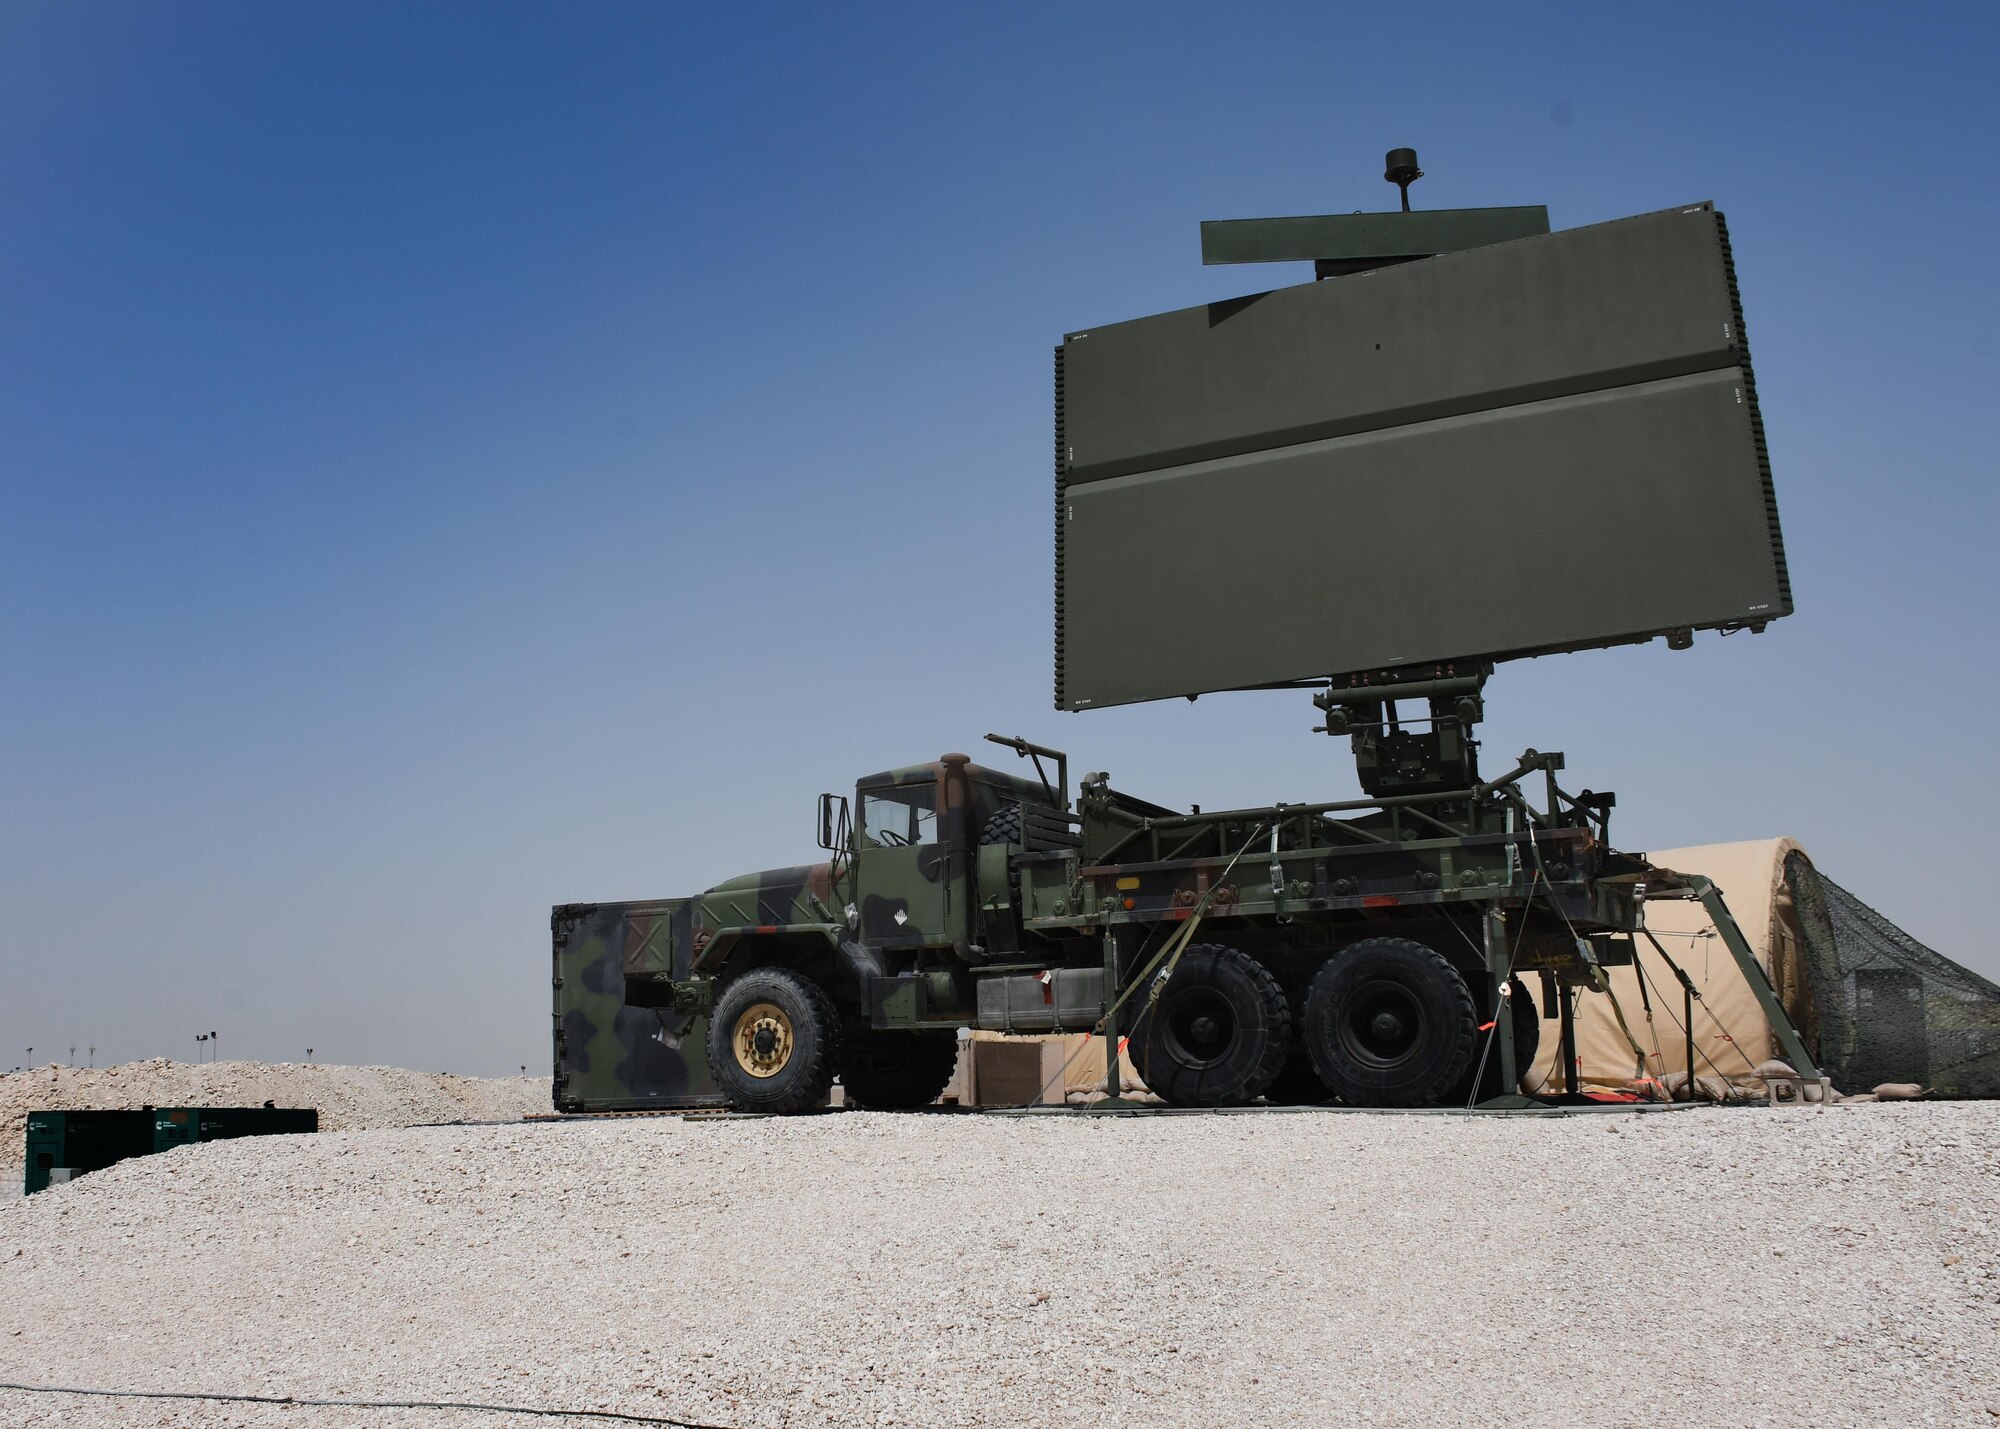 A mobile TPS-75 ground radar system sits on a truck at Al Udeid Air Base, Qatar, March 31, 2017. The ground radar system is maintained by the 727th Expeditionary Air Control Squadron Detachment 3, and monitors the airspace around Al Udeid. (U.S. Air Force photo by Senior Airman Miles Wilson)